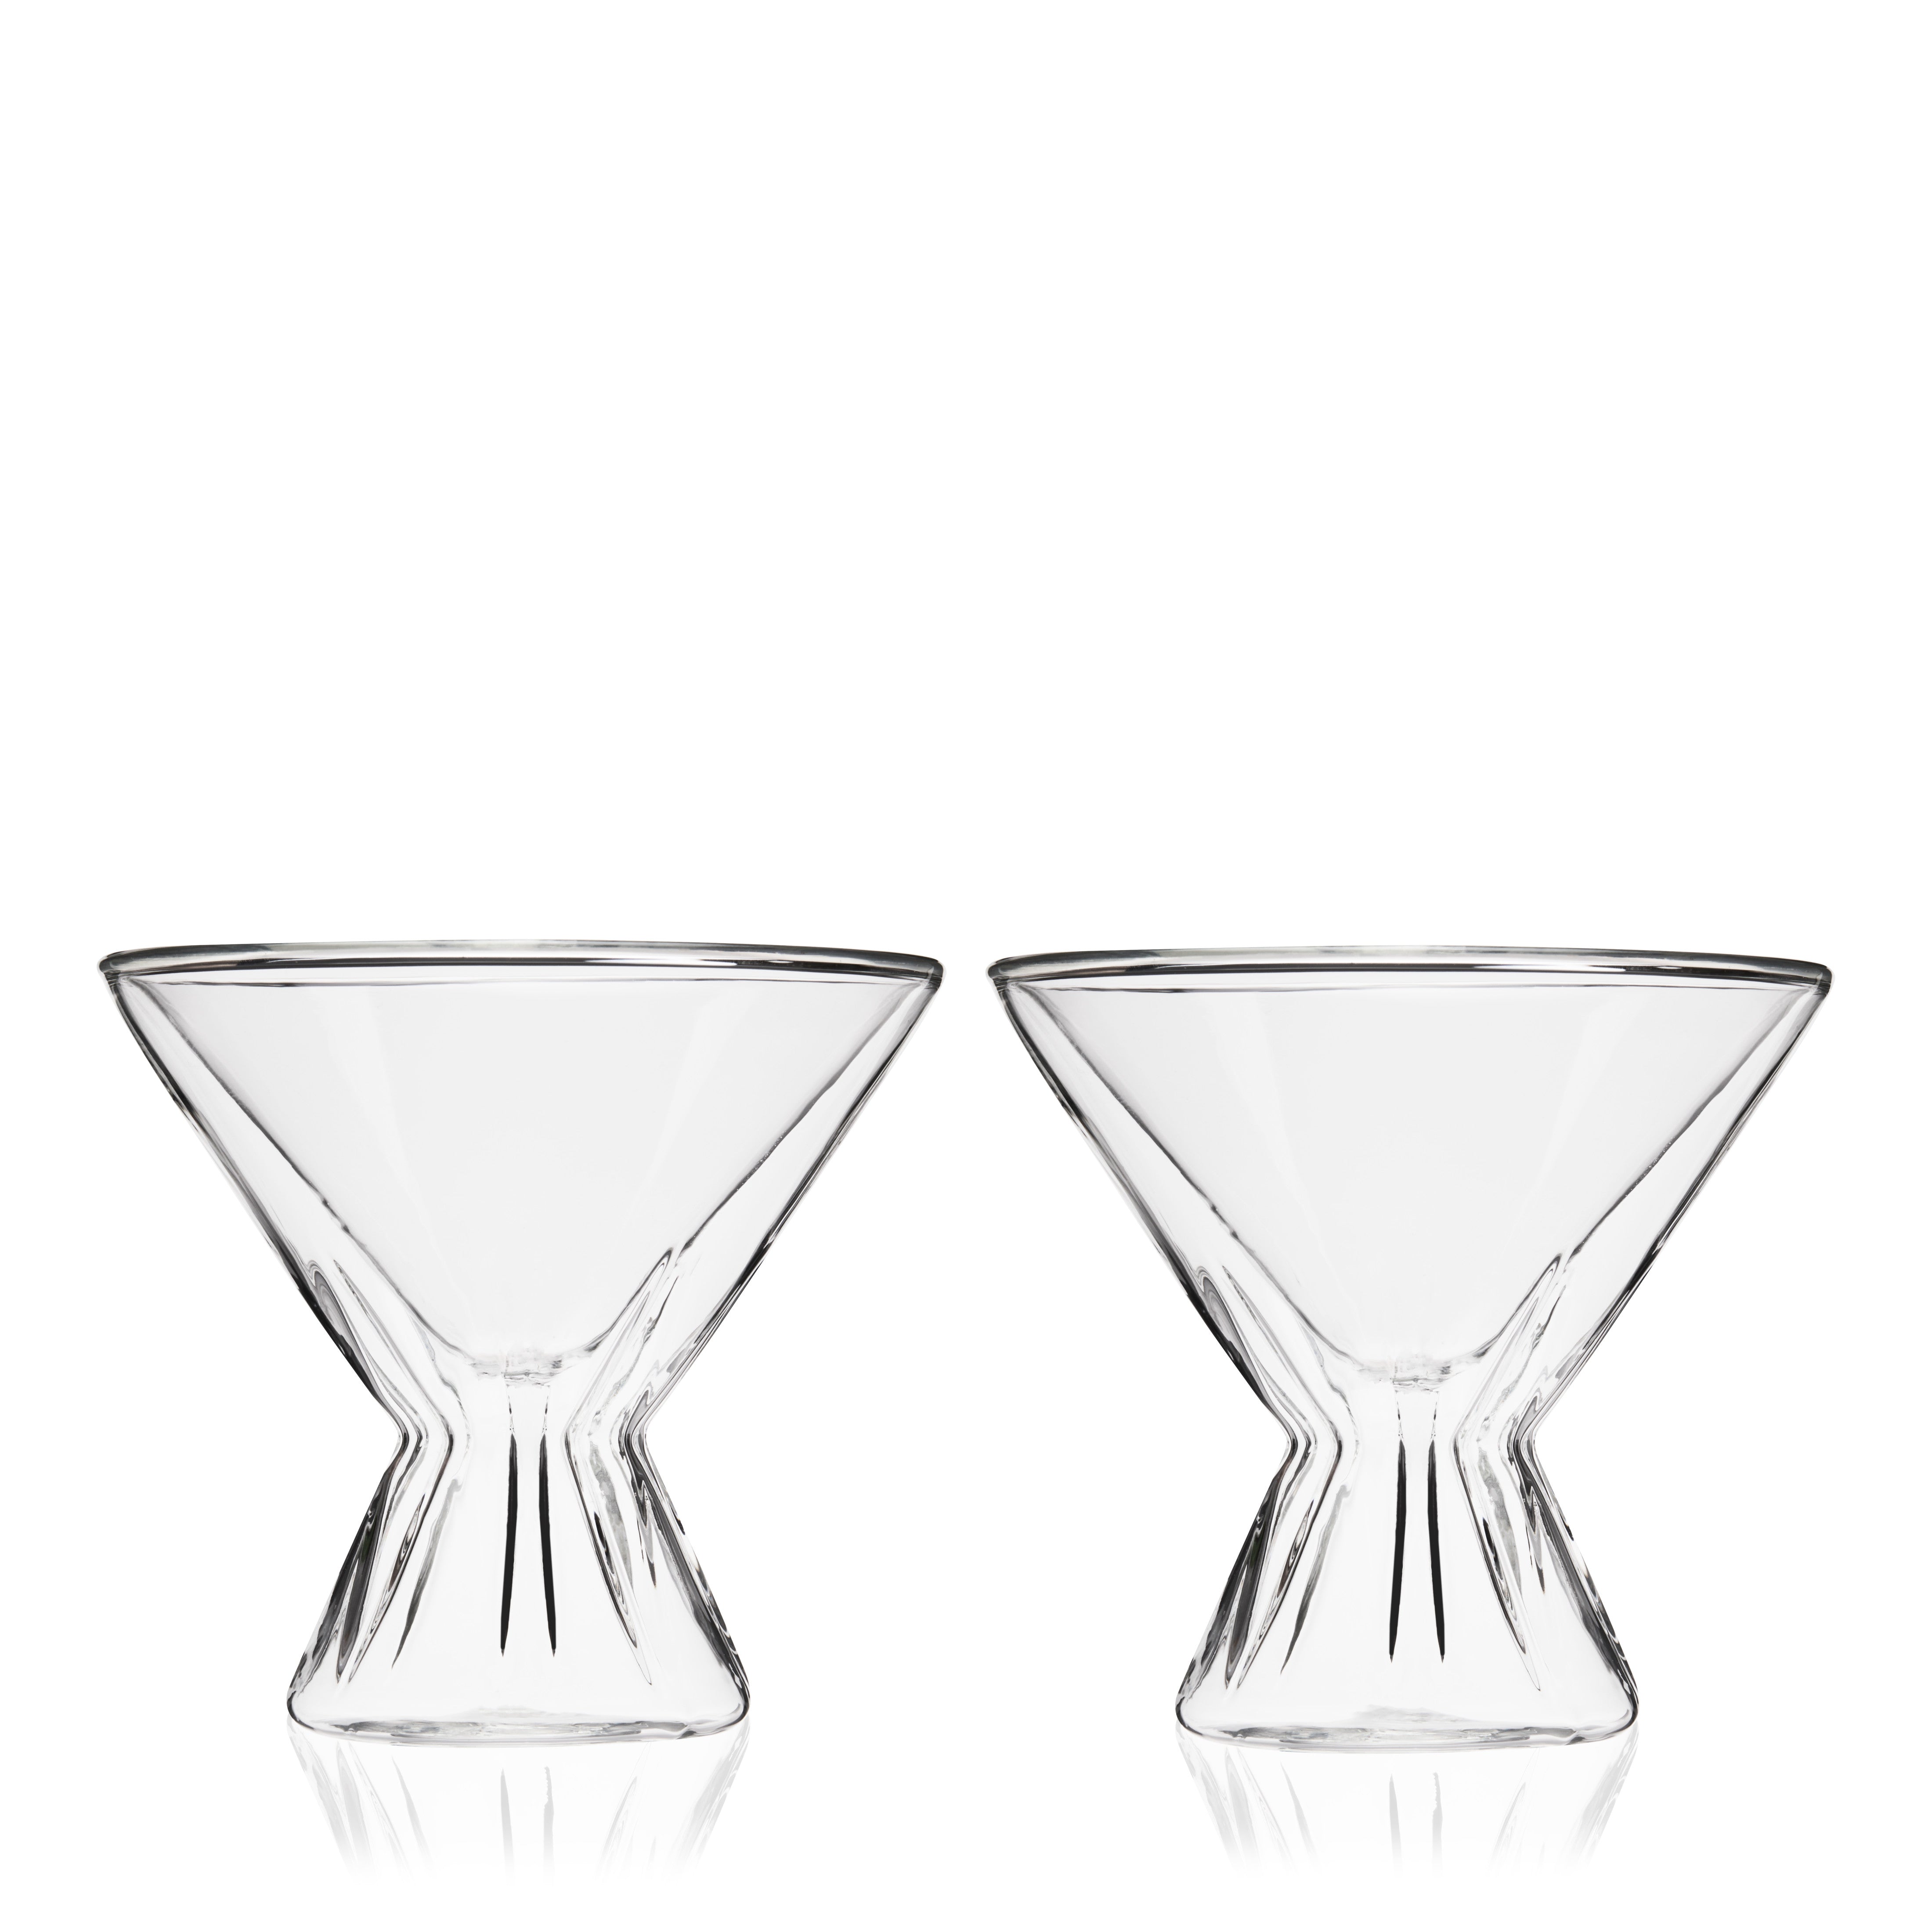 Martini Glasses, Stemless Double Wall Cocktail and Whiskey Glass Set, High  Quality Elegant Drinkware, Keeps Drinks Cold, 7-ounce, Set of 2 